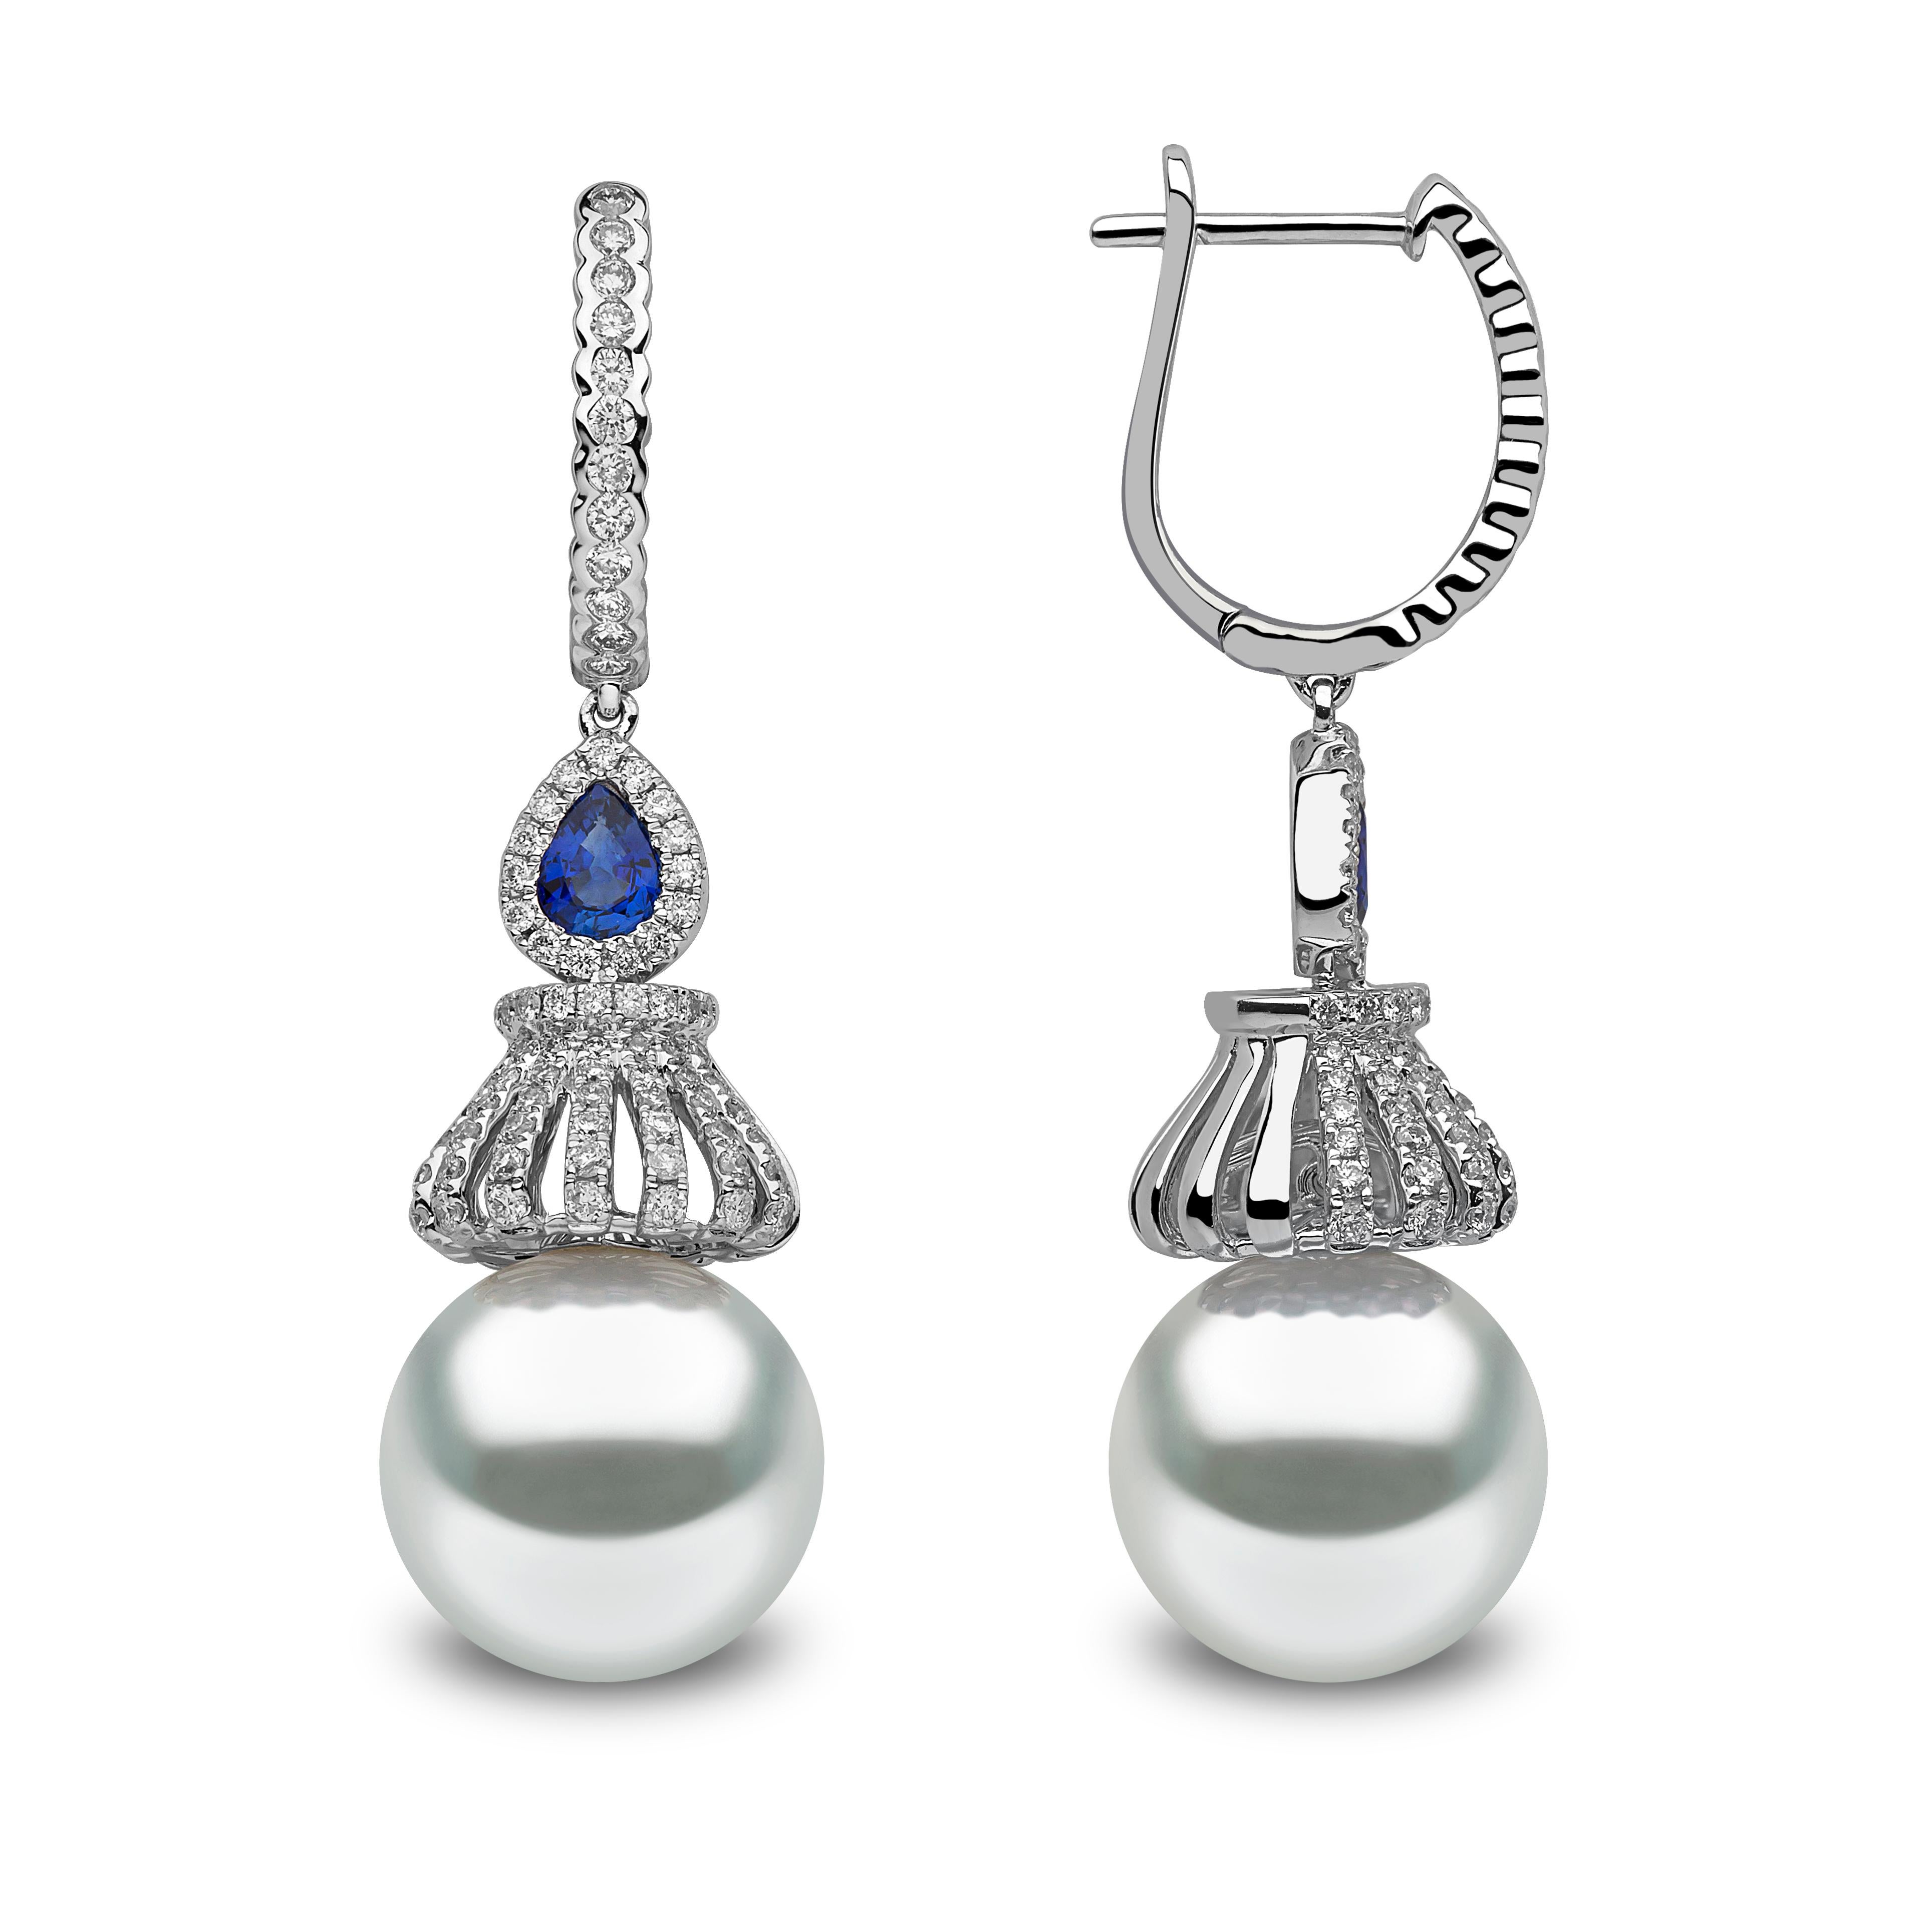 These elegant 18ct white gold earrings feature high quality South Sea pearls, beneath a mesmeric combination of diamonds and  pear cut sapphires. These unique earrings will add a pop of color to any outfit. 

- 12-12.5mm South Sea Pearls
- 0.88ct of